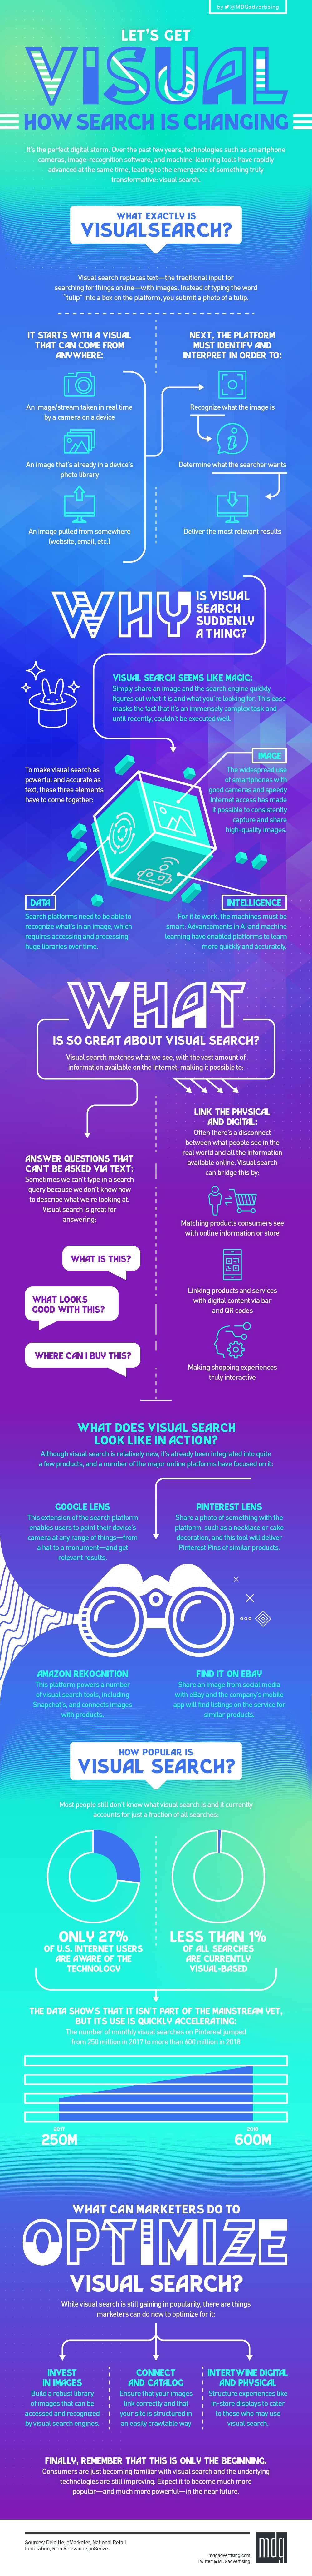 Let’s Get Visual: How Search Is Changing [Infographic]